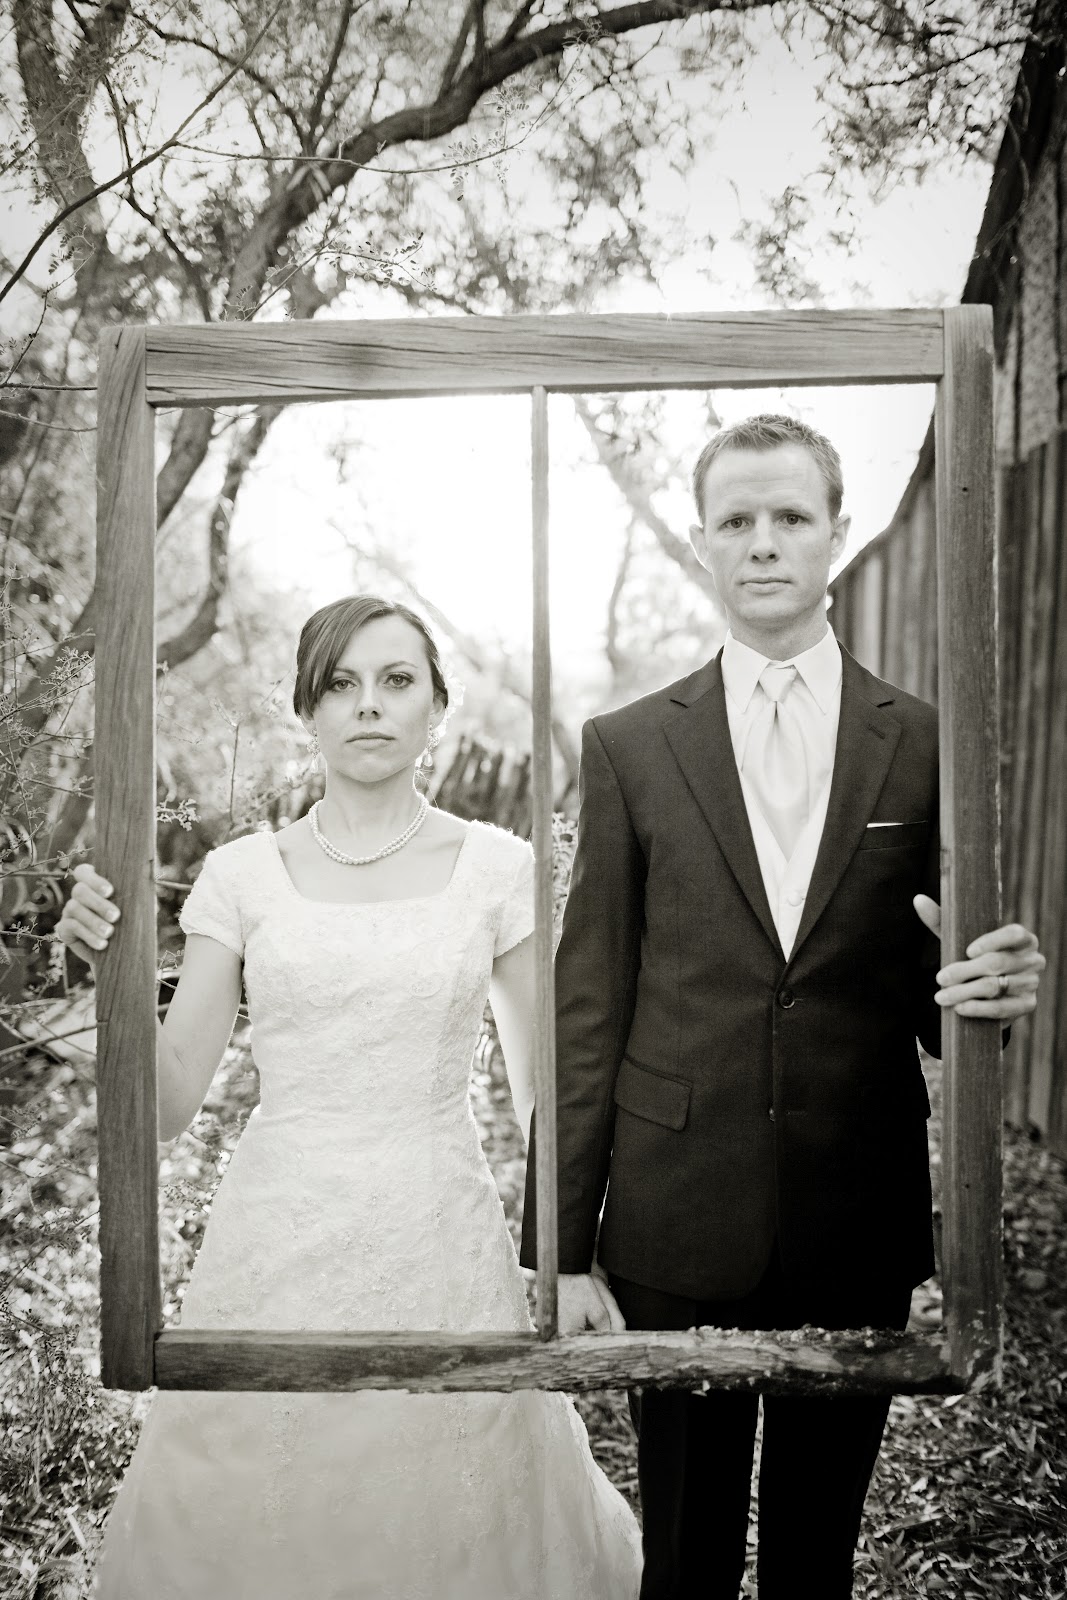 Funny wedding photo idea with the bride and groom holding a frame posing like the famous painting The Farmer\'s Wife. 